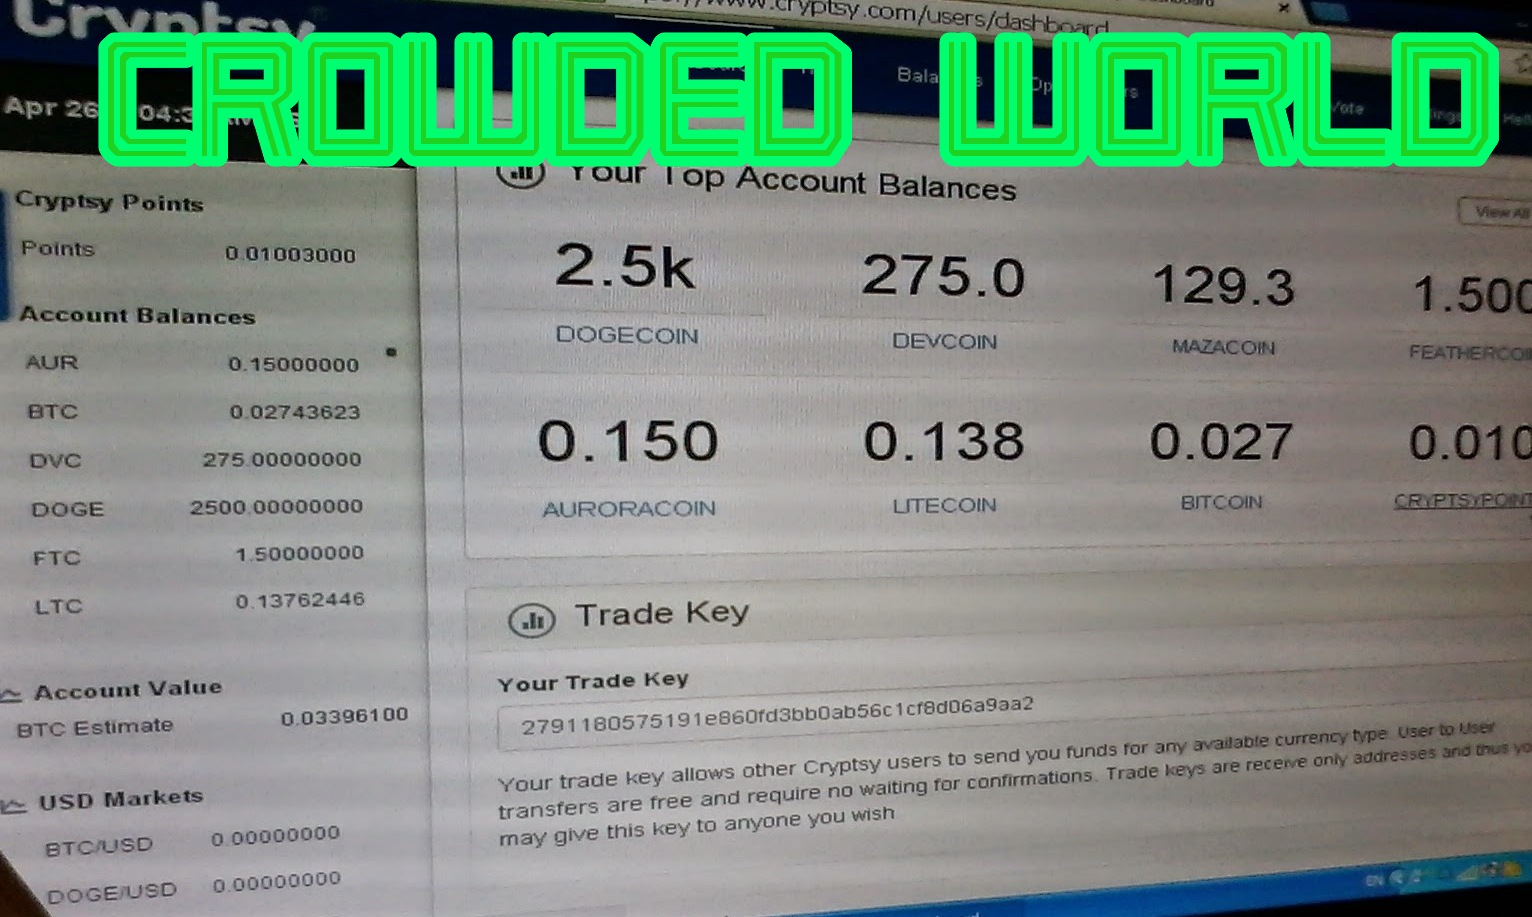 Trading on Cryptsy, at Breezy